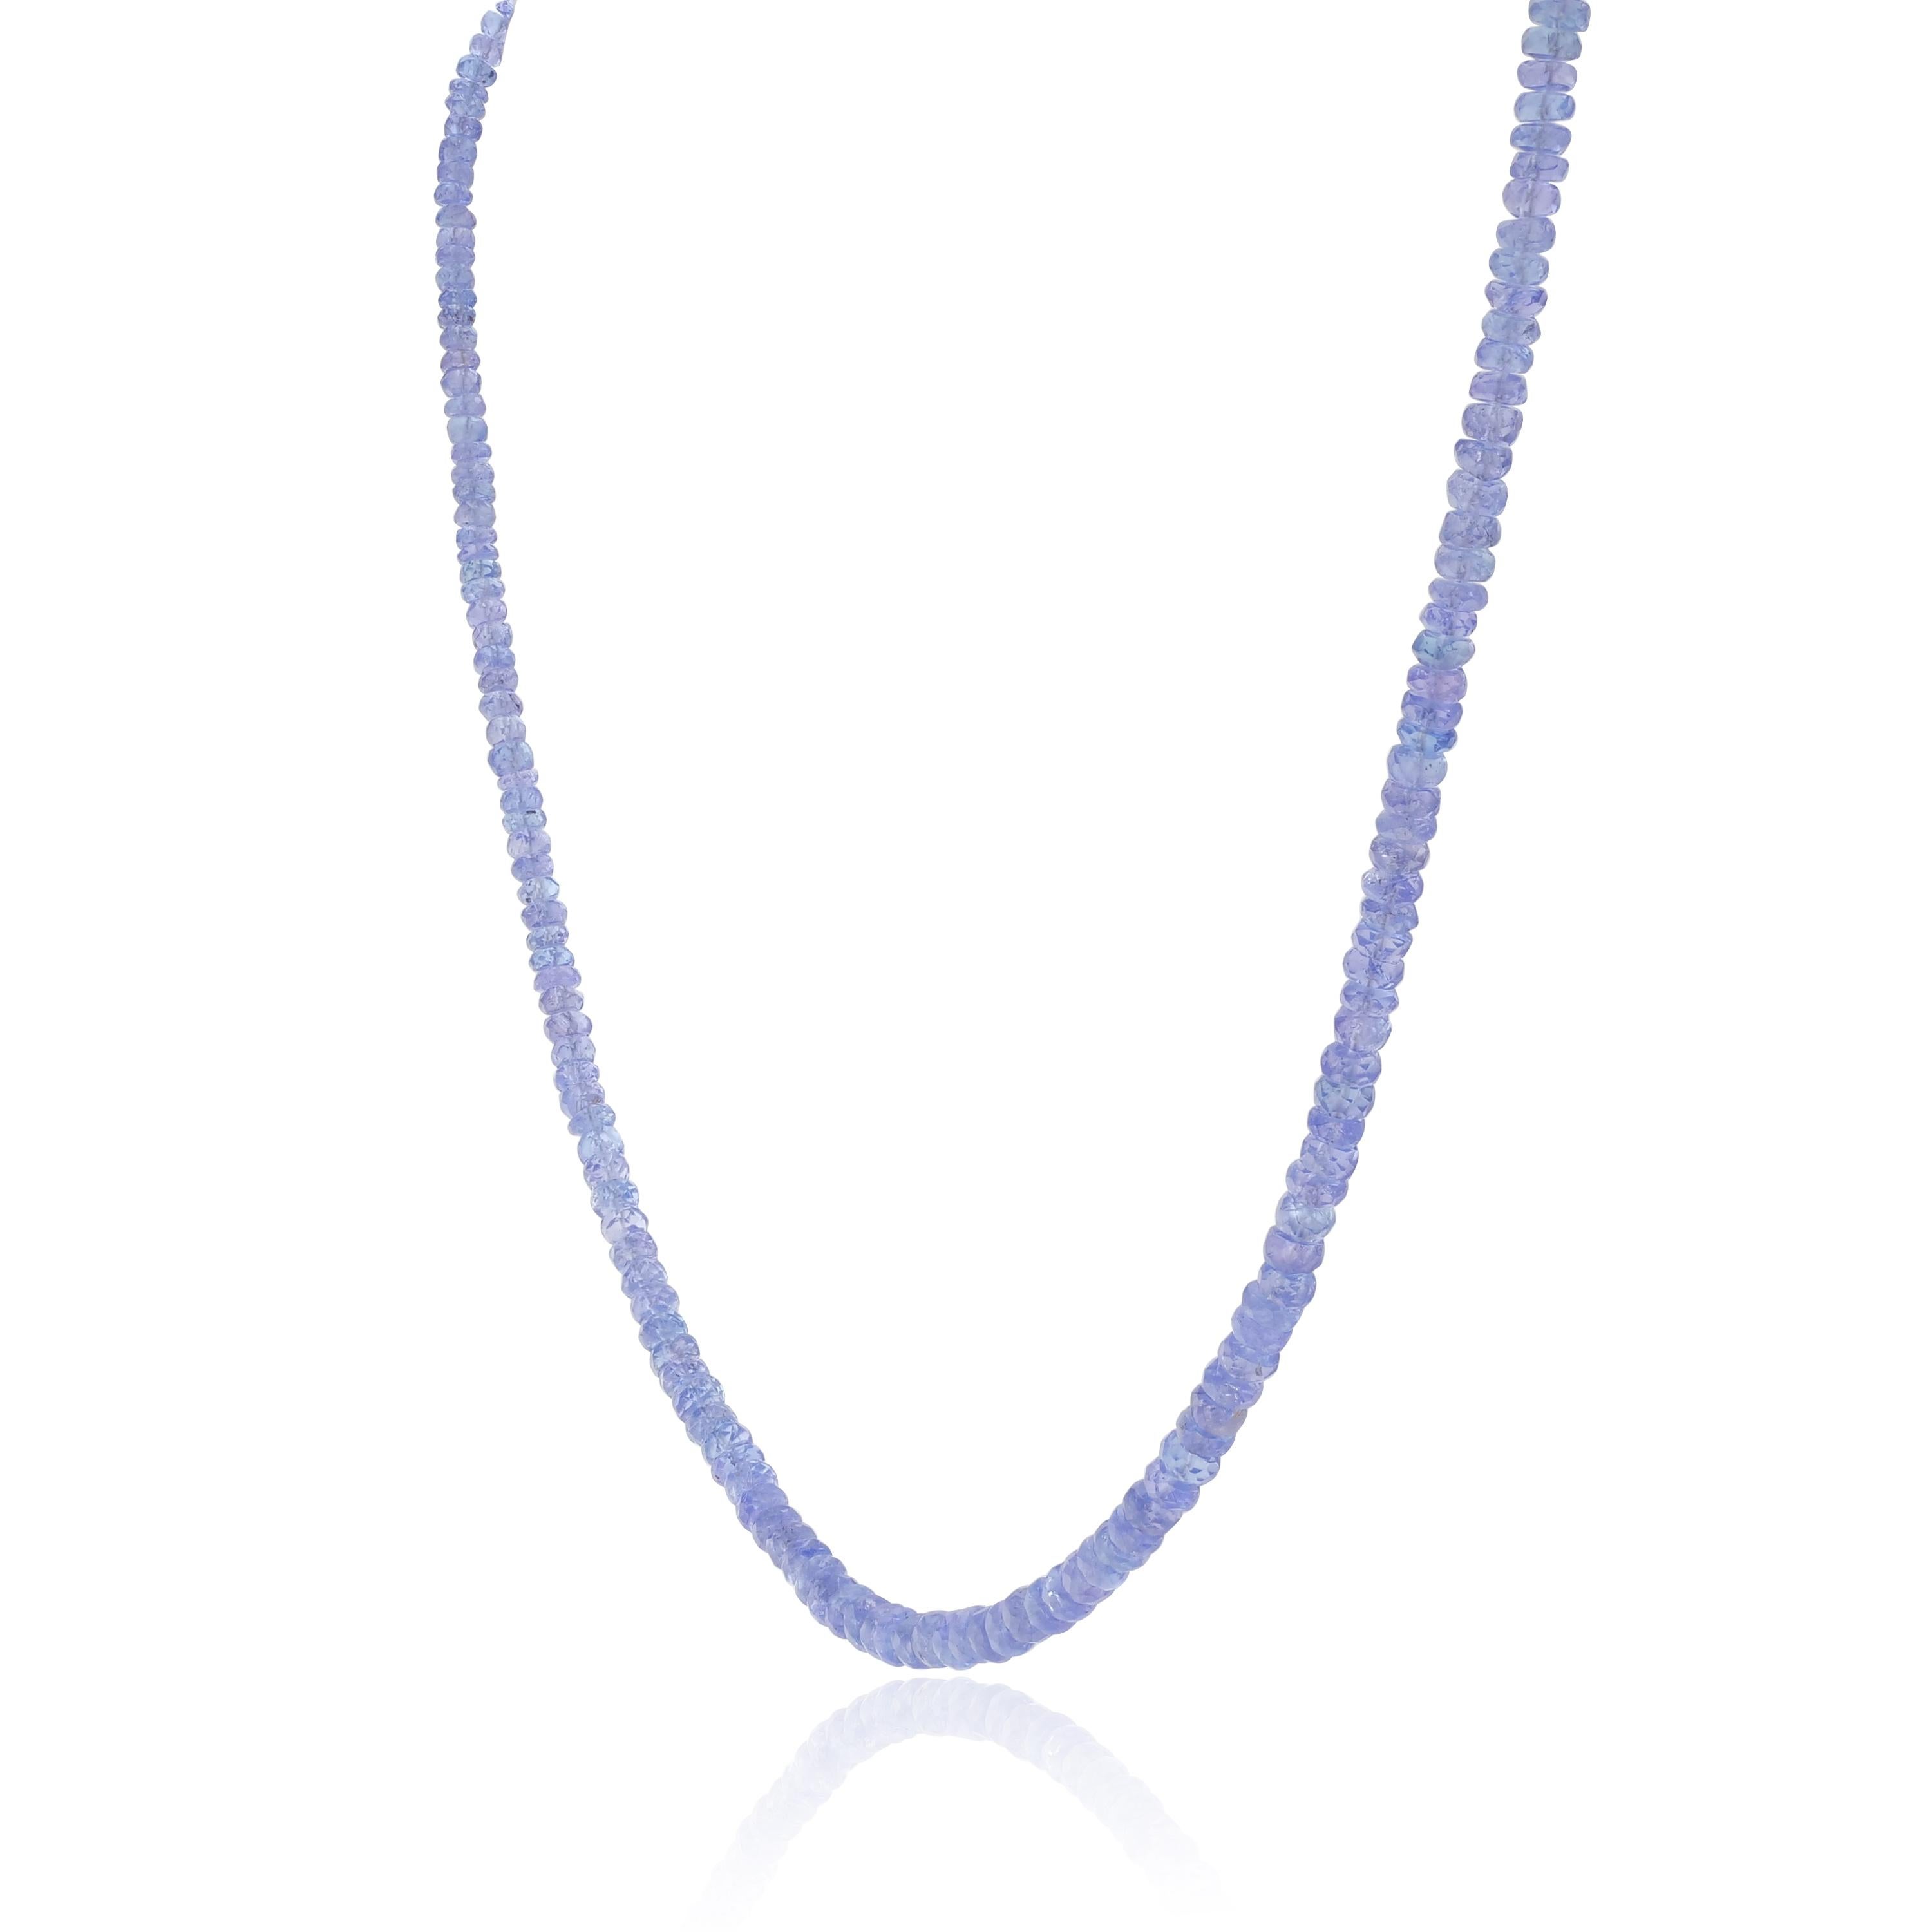 Modern 56.57 Carat Tanzanite Beads Necklace in Sterling Silver